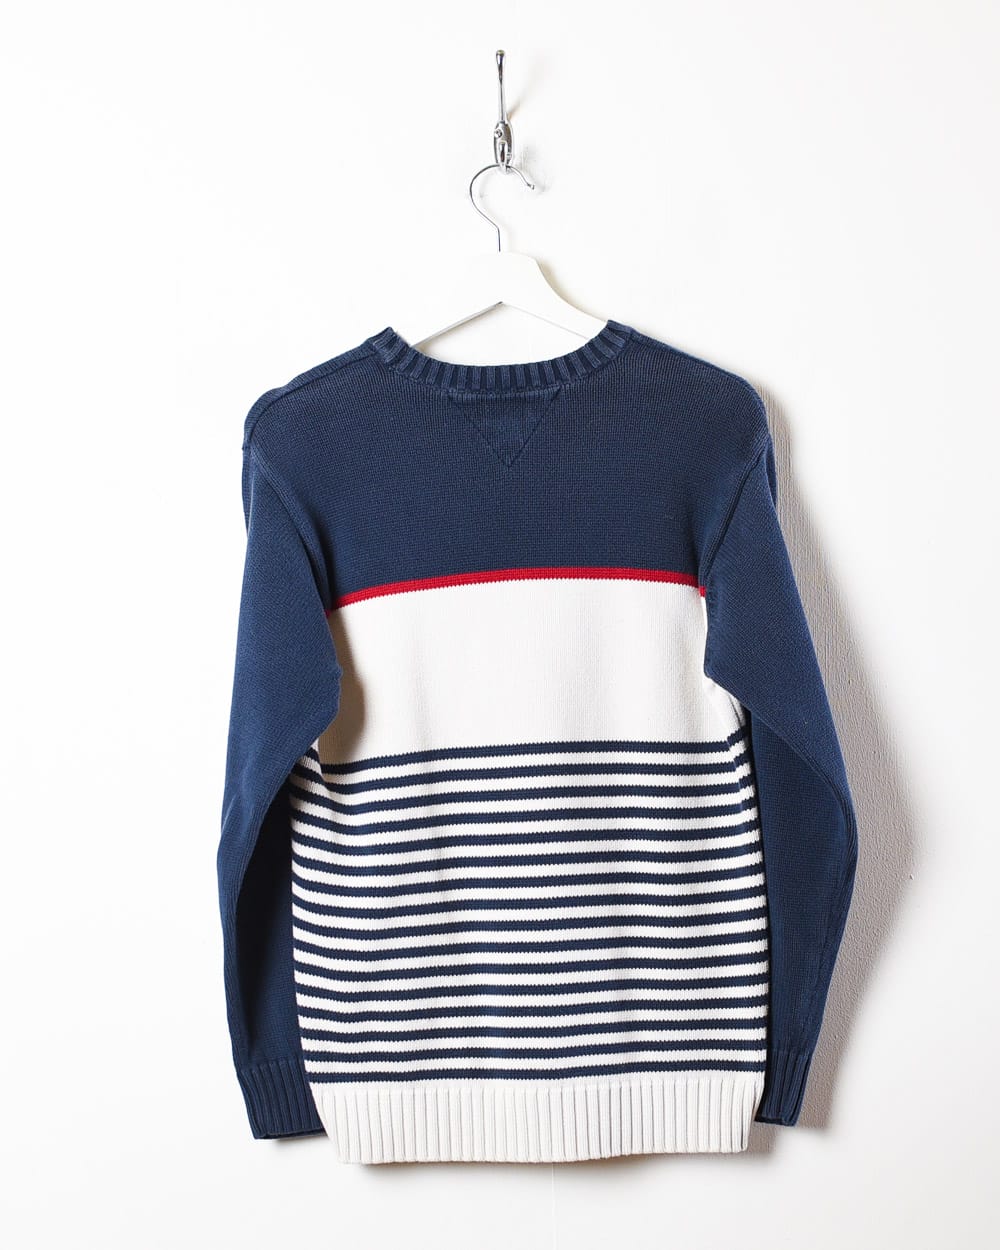 Navy Tommy Hilfiger Striped Knitted Sweatshirt - Small